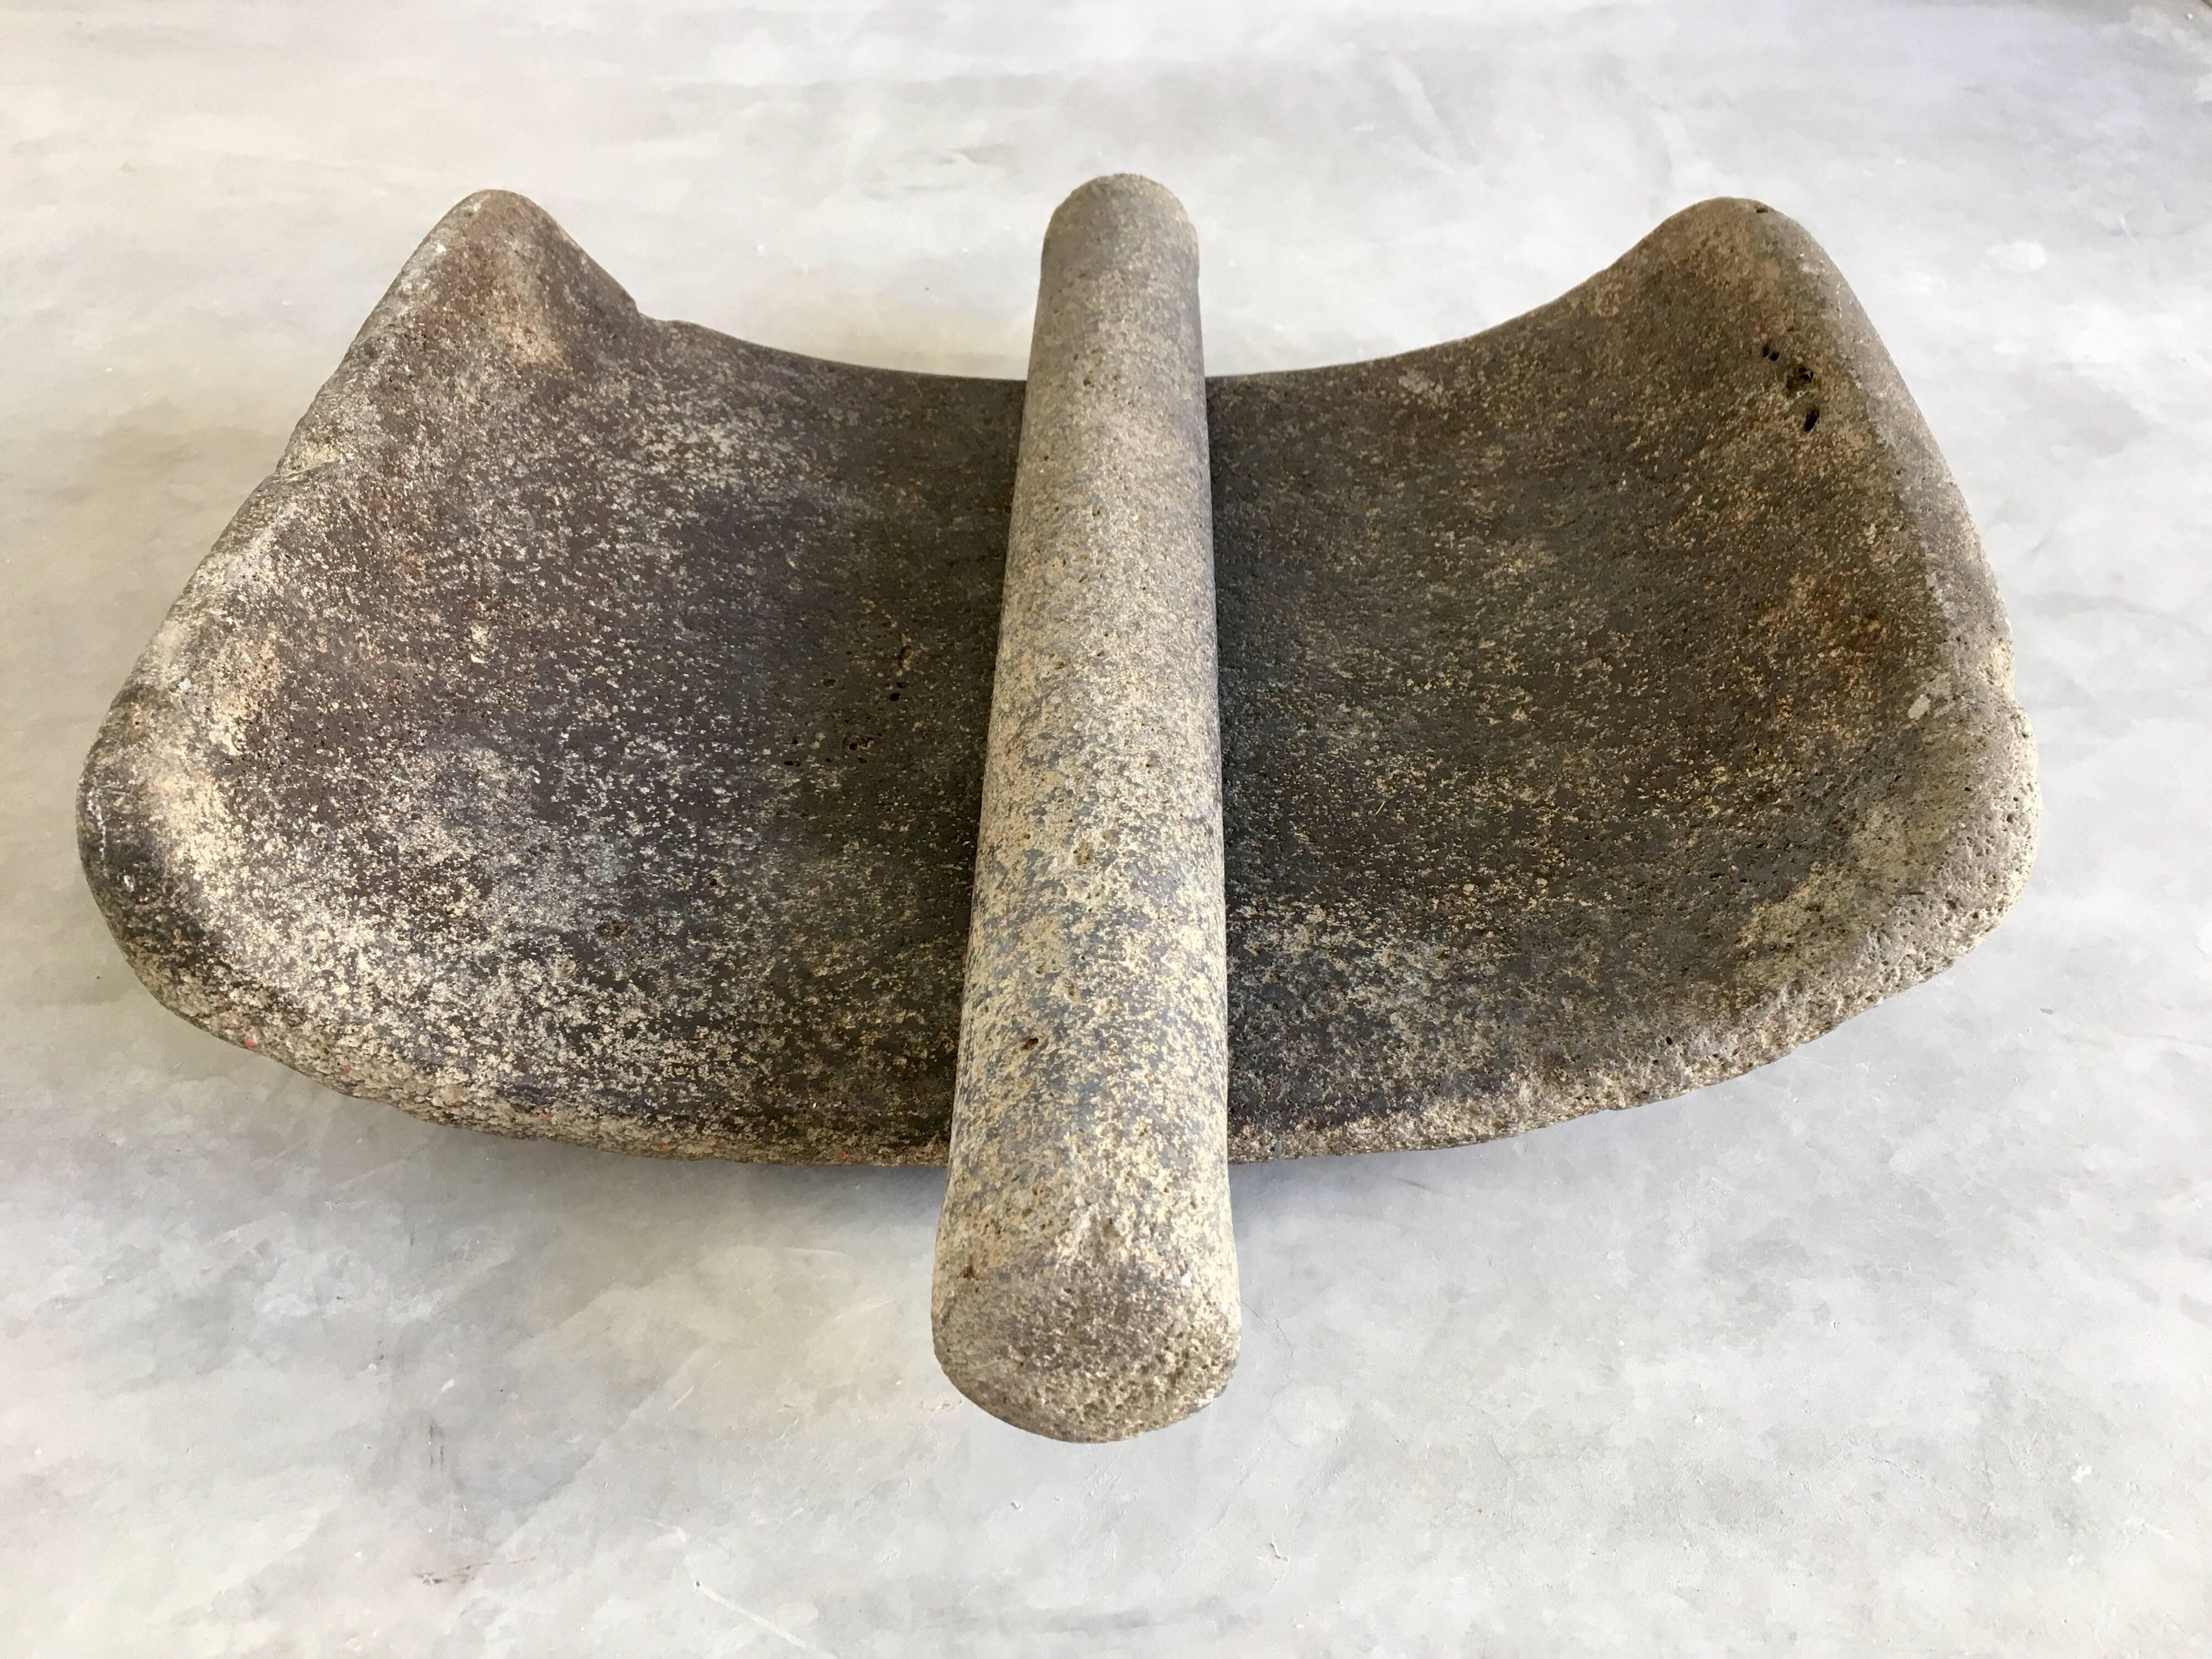 Primitive-styled, indigenous mortar from the Otomi people of the Hidalgo/Guanajuato border area, Mexico. Used to grind corn as well as other coarse grains. Original grinding arm is included. Made of volcanic stone of a very dense nature given it's